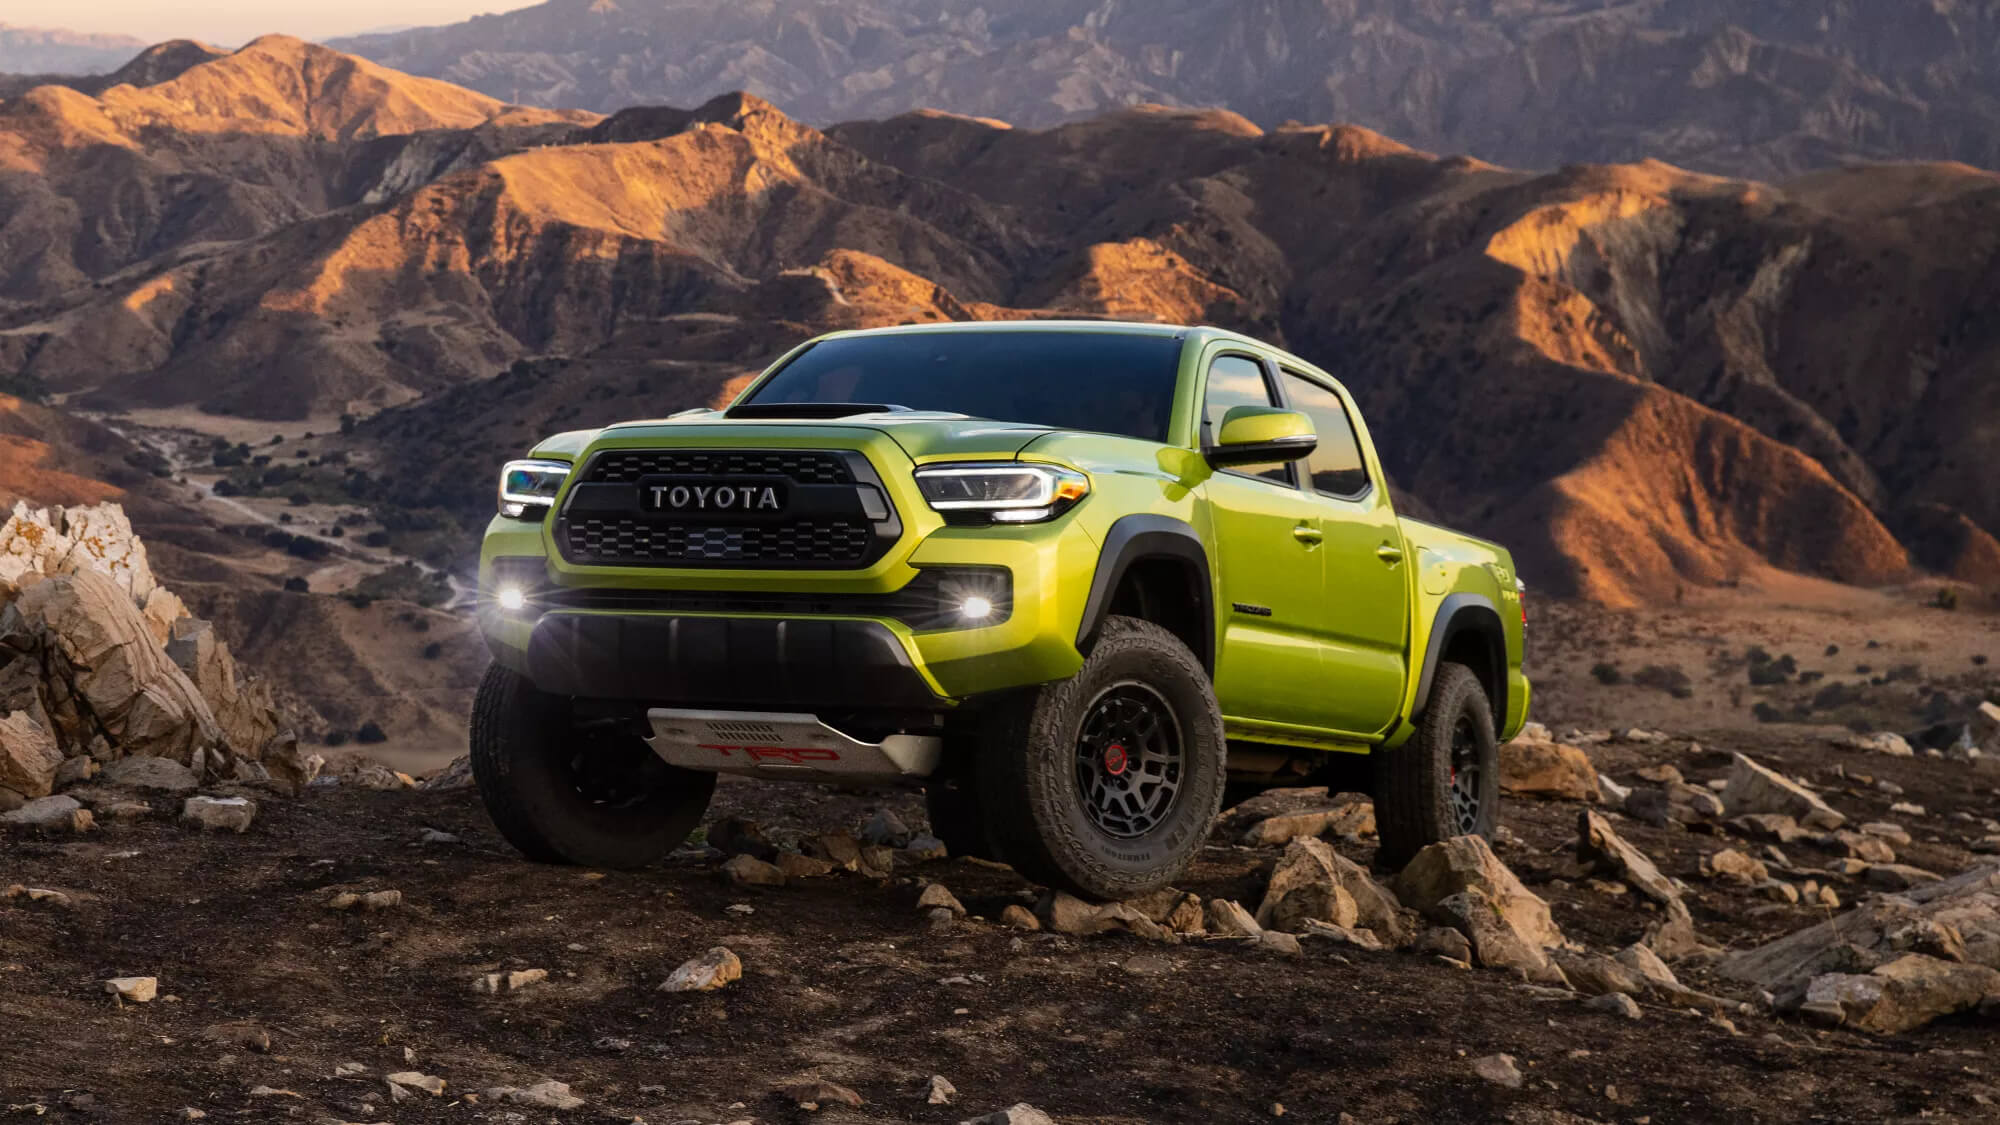 The Next-Gen Tacoma & 4Runner to Share Same Platform as the Hilux